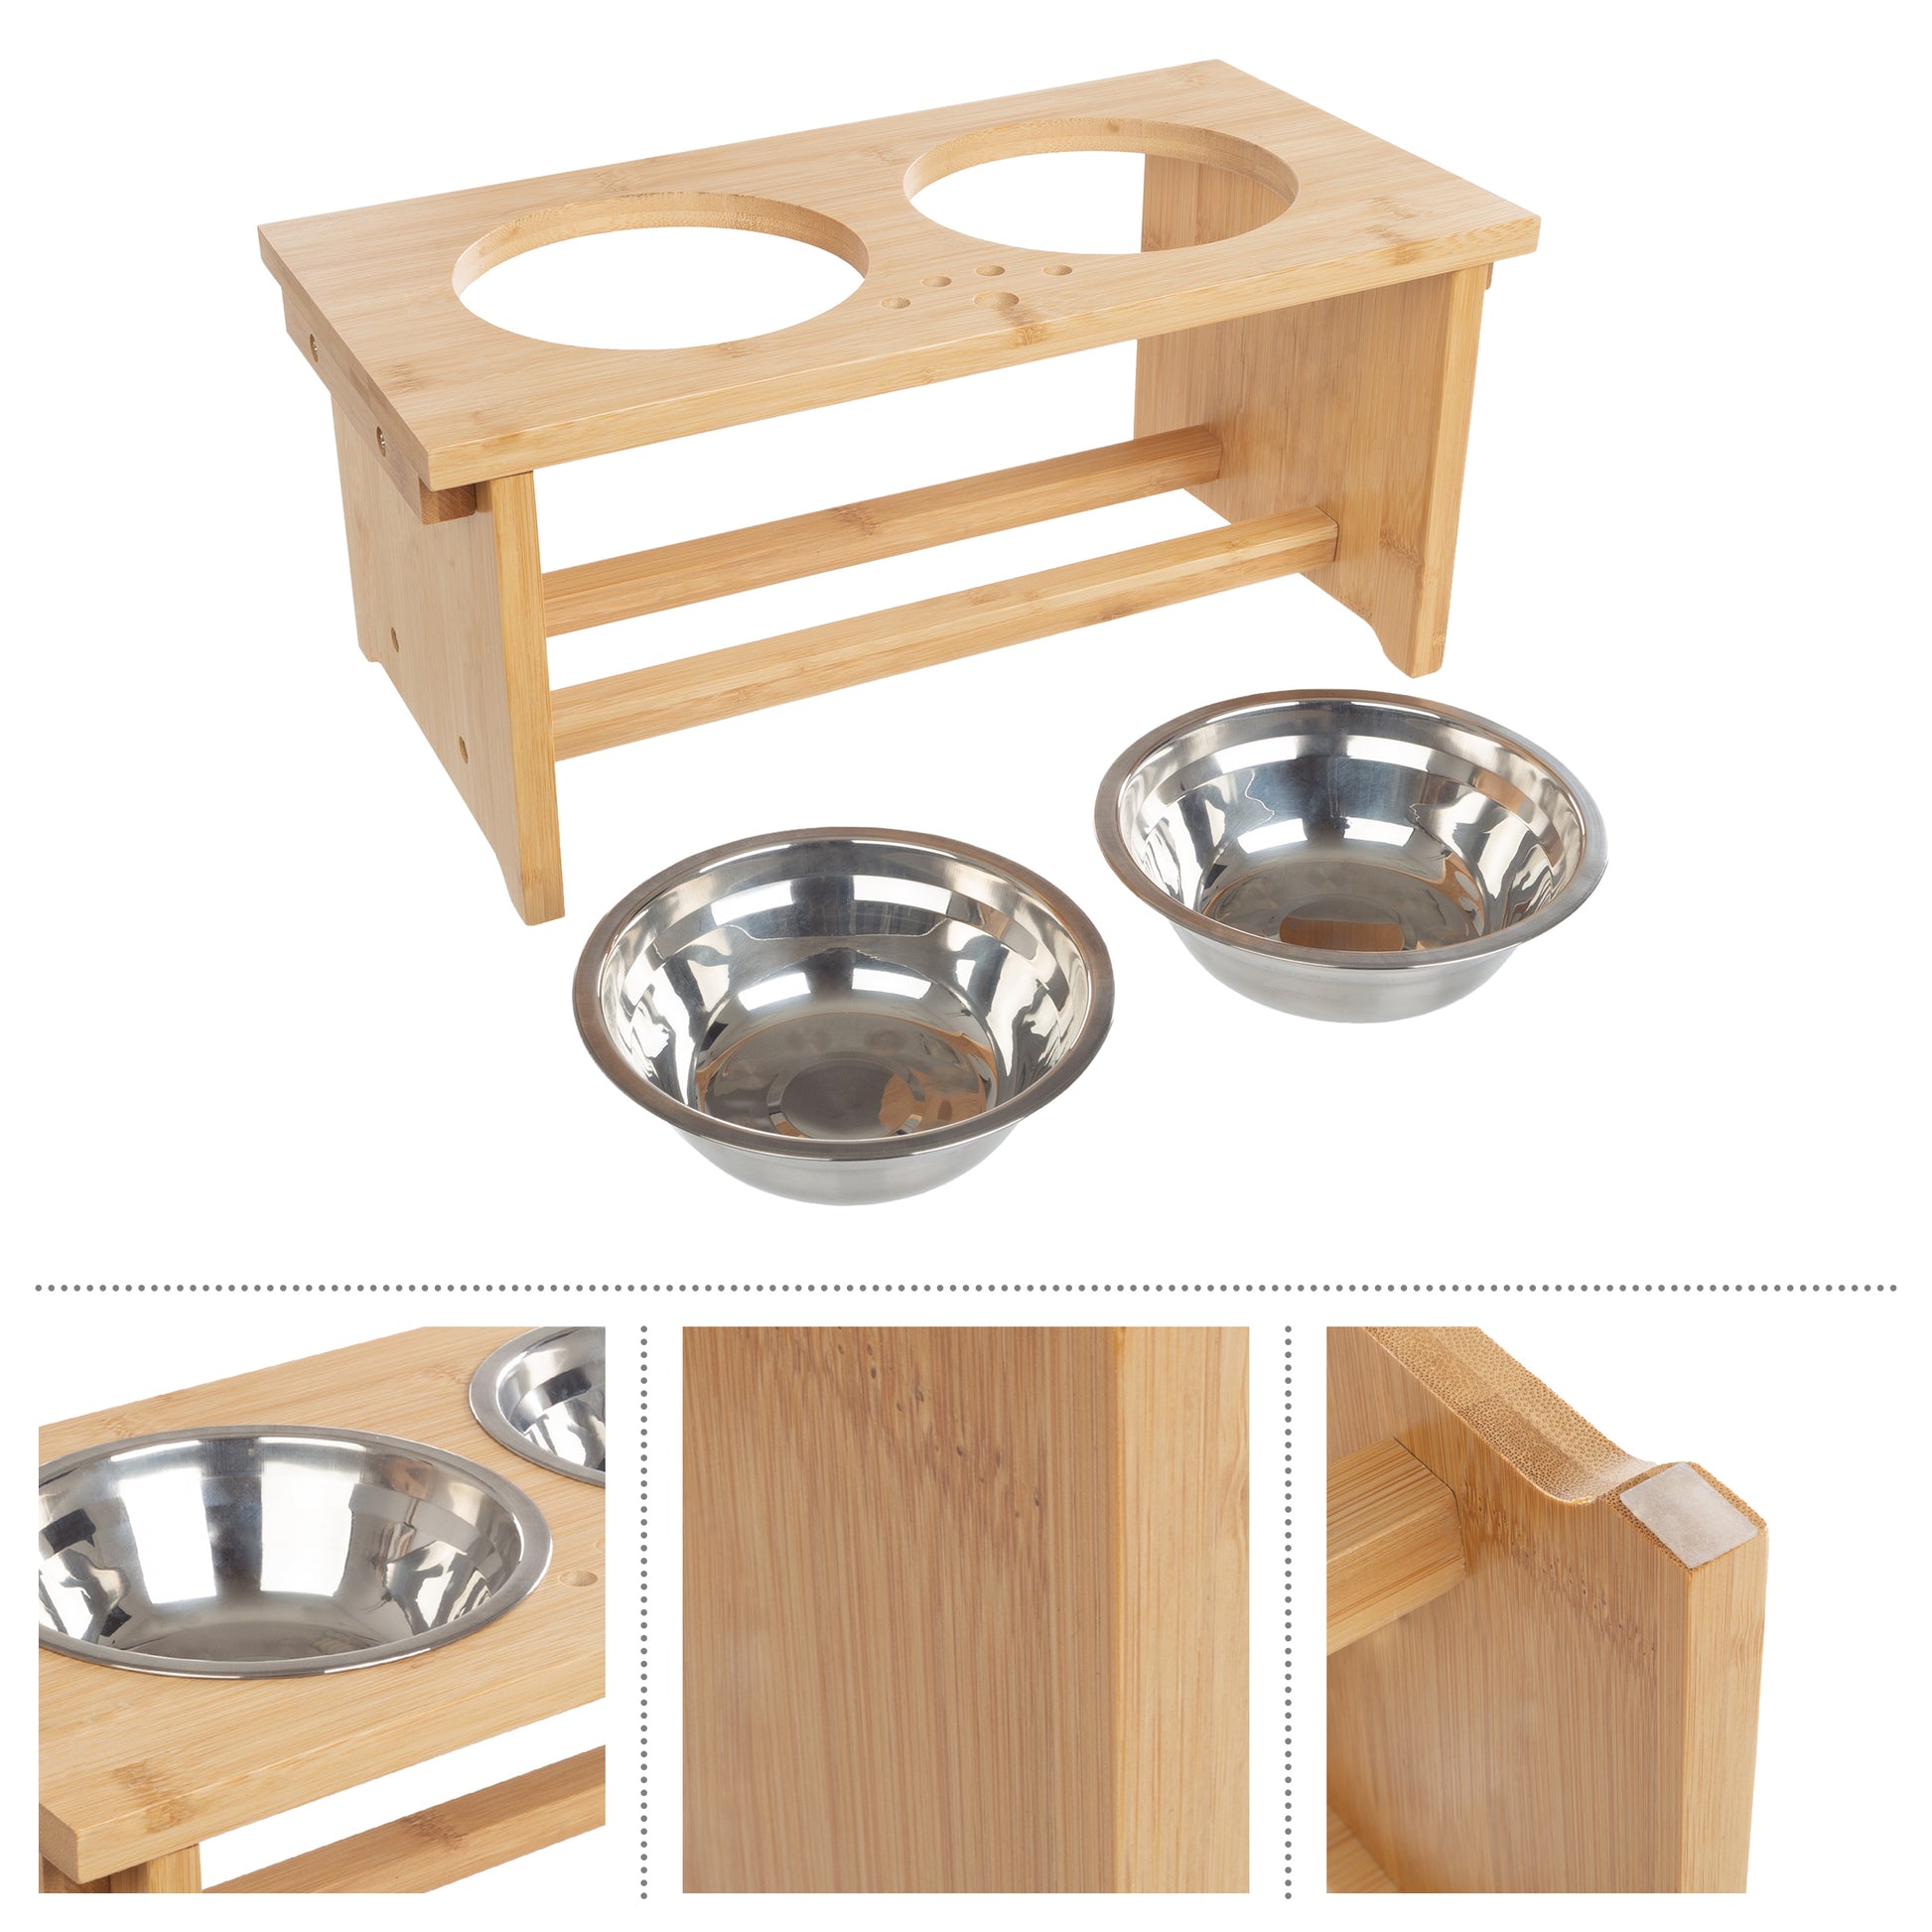 Elevated Dog Bowls, Adjustable Raised Dog Bowl Stand Feeder for Small Size Dogs and Cats, Durable Bamboo Dog Food Bowl Stand with 2 Stainless Steel